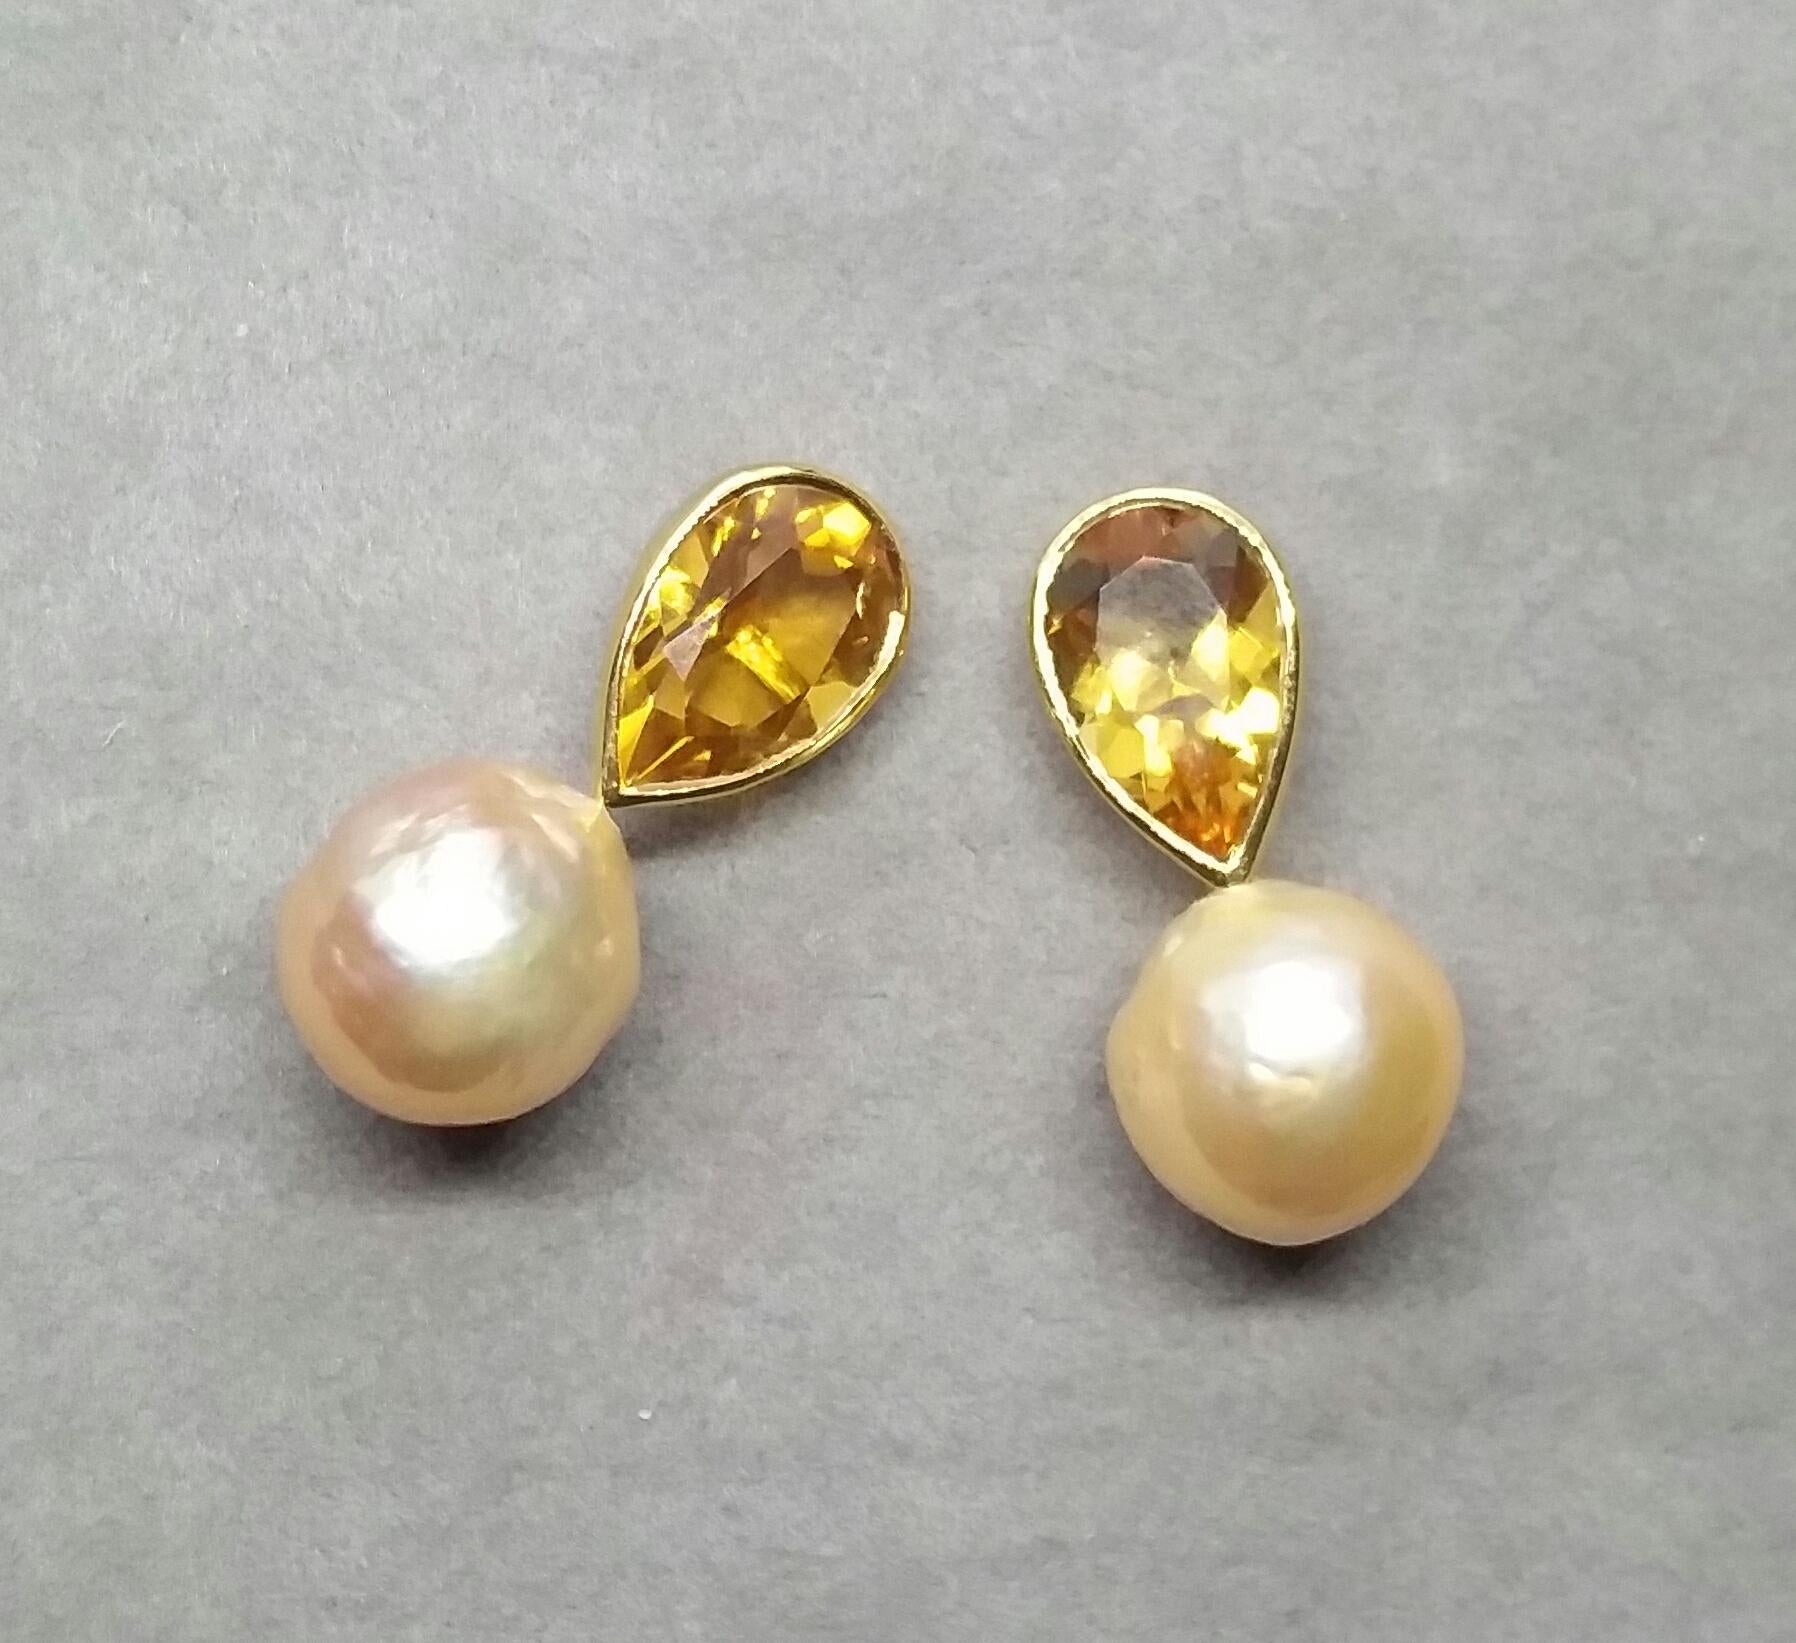 These simple but elegant and completely handmade earrings have 2 Pear Shape Faceted  Natural Citrines measuring 7 x 12 mm set in 14 Kt yellow gold bezel at the top to which are suspended 2  Natural Cream Color Baroque Pearls  12 mm in diameter

In